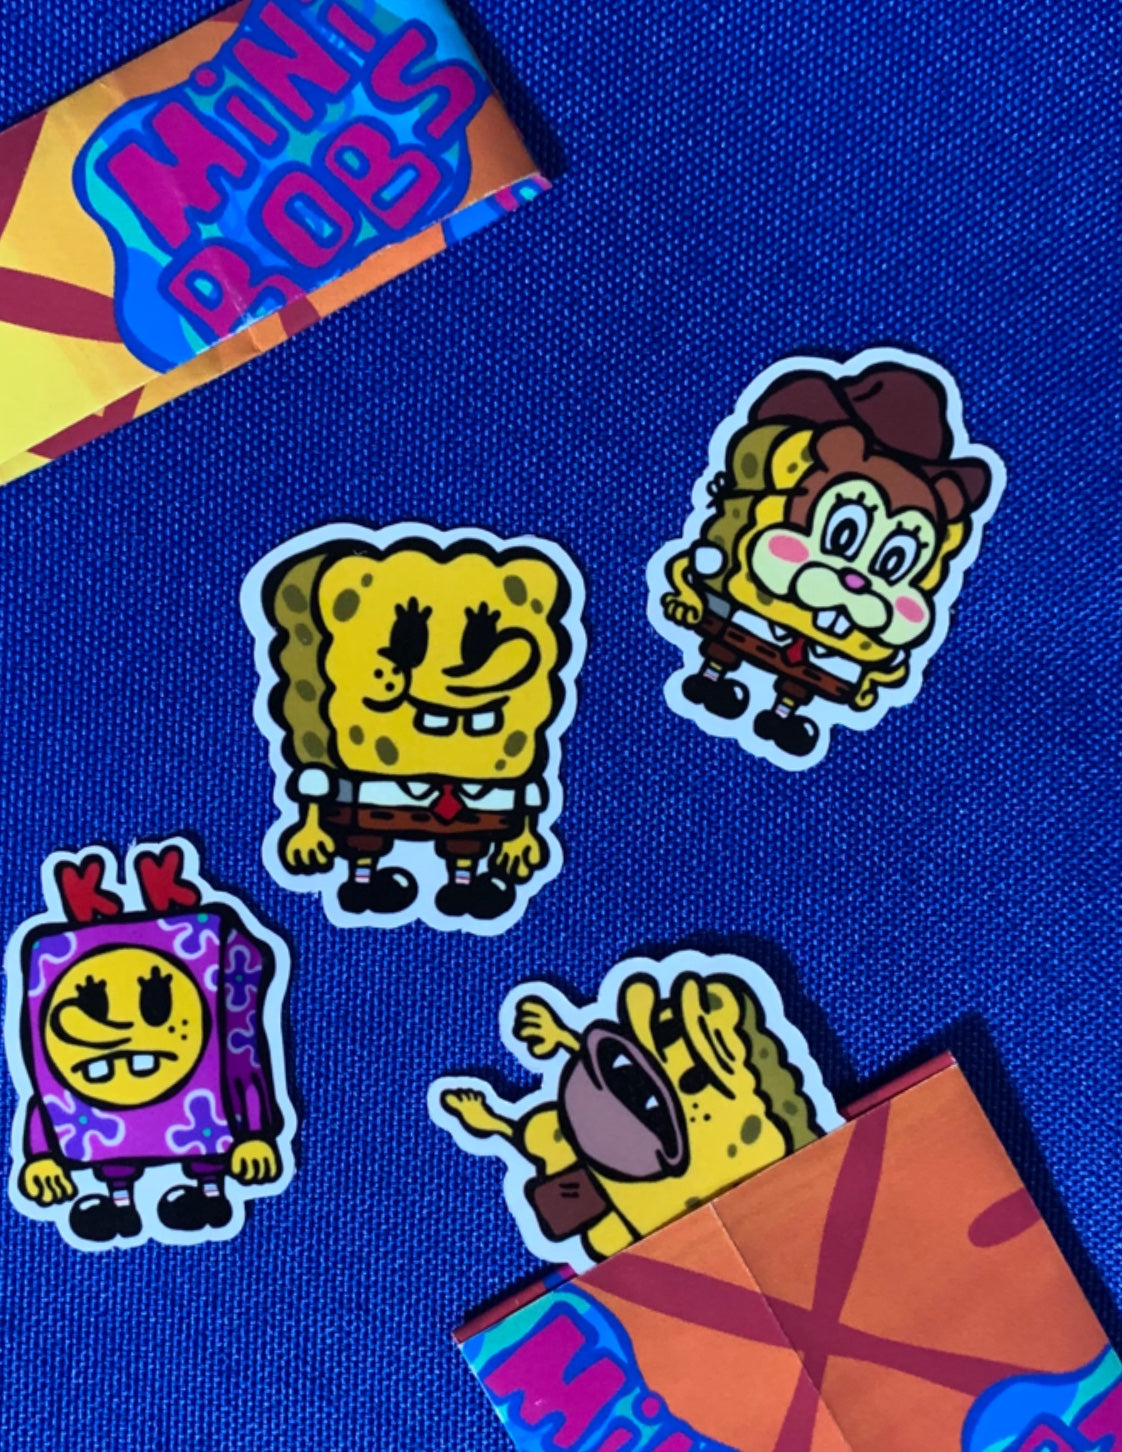 "Mini Bobs" Blind Pack 1" Stickers by CrystalFace